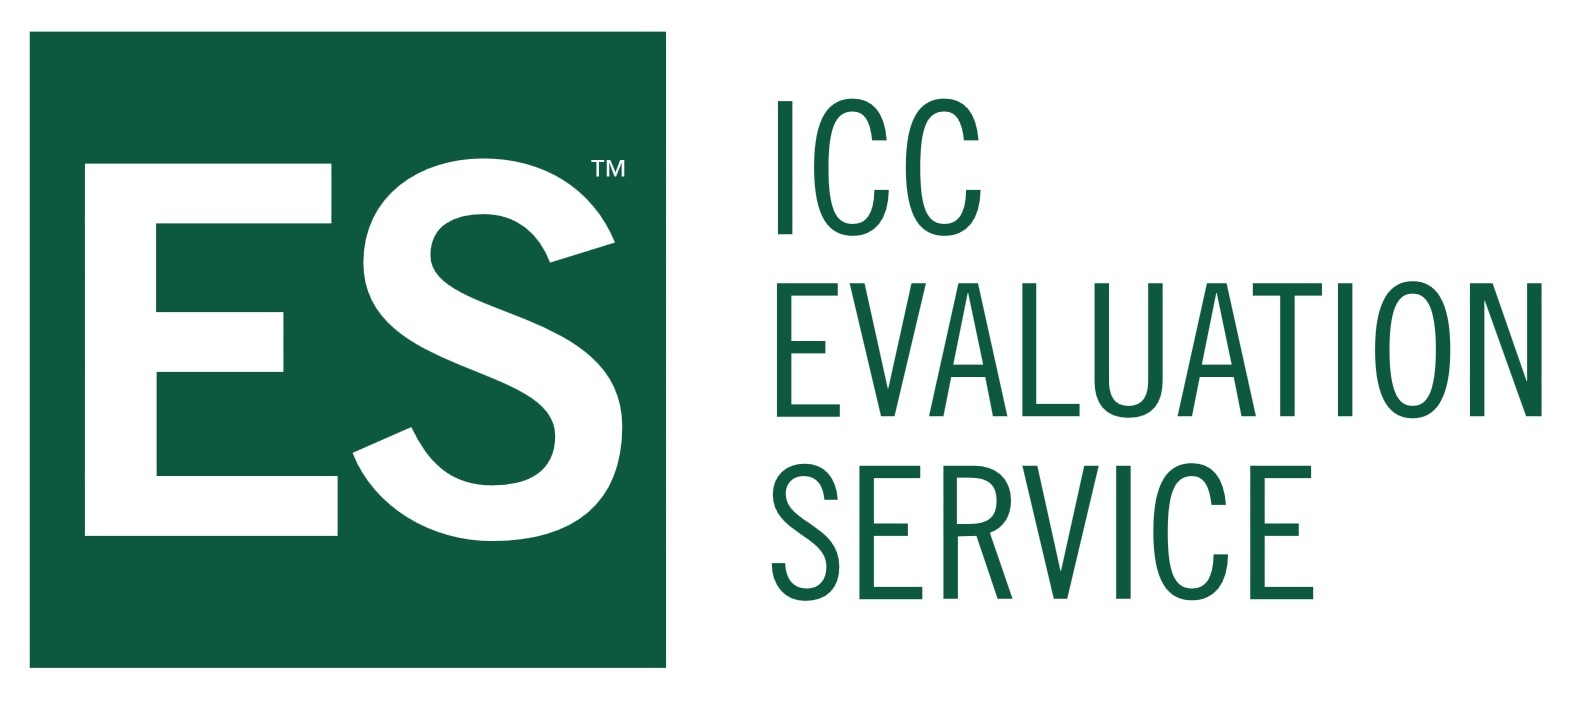 ICC-ES offers submittal service for product approval in Florida